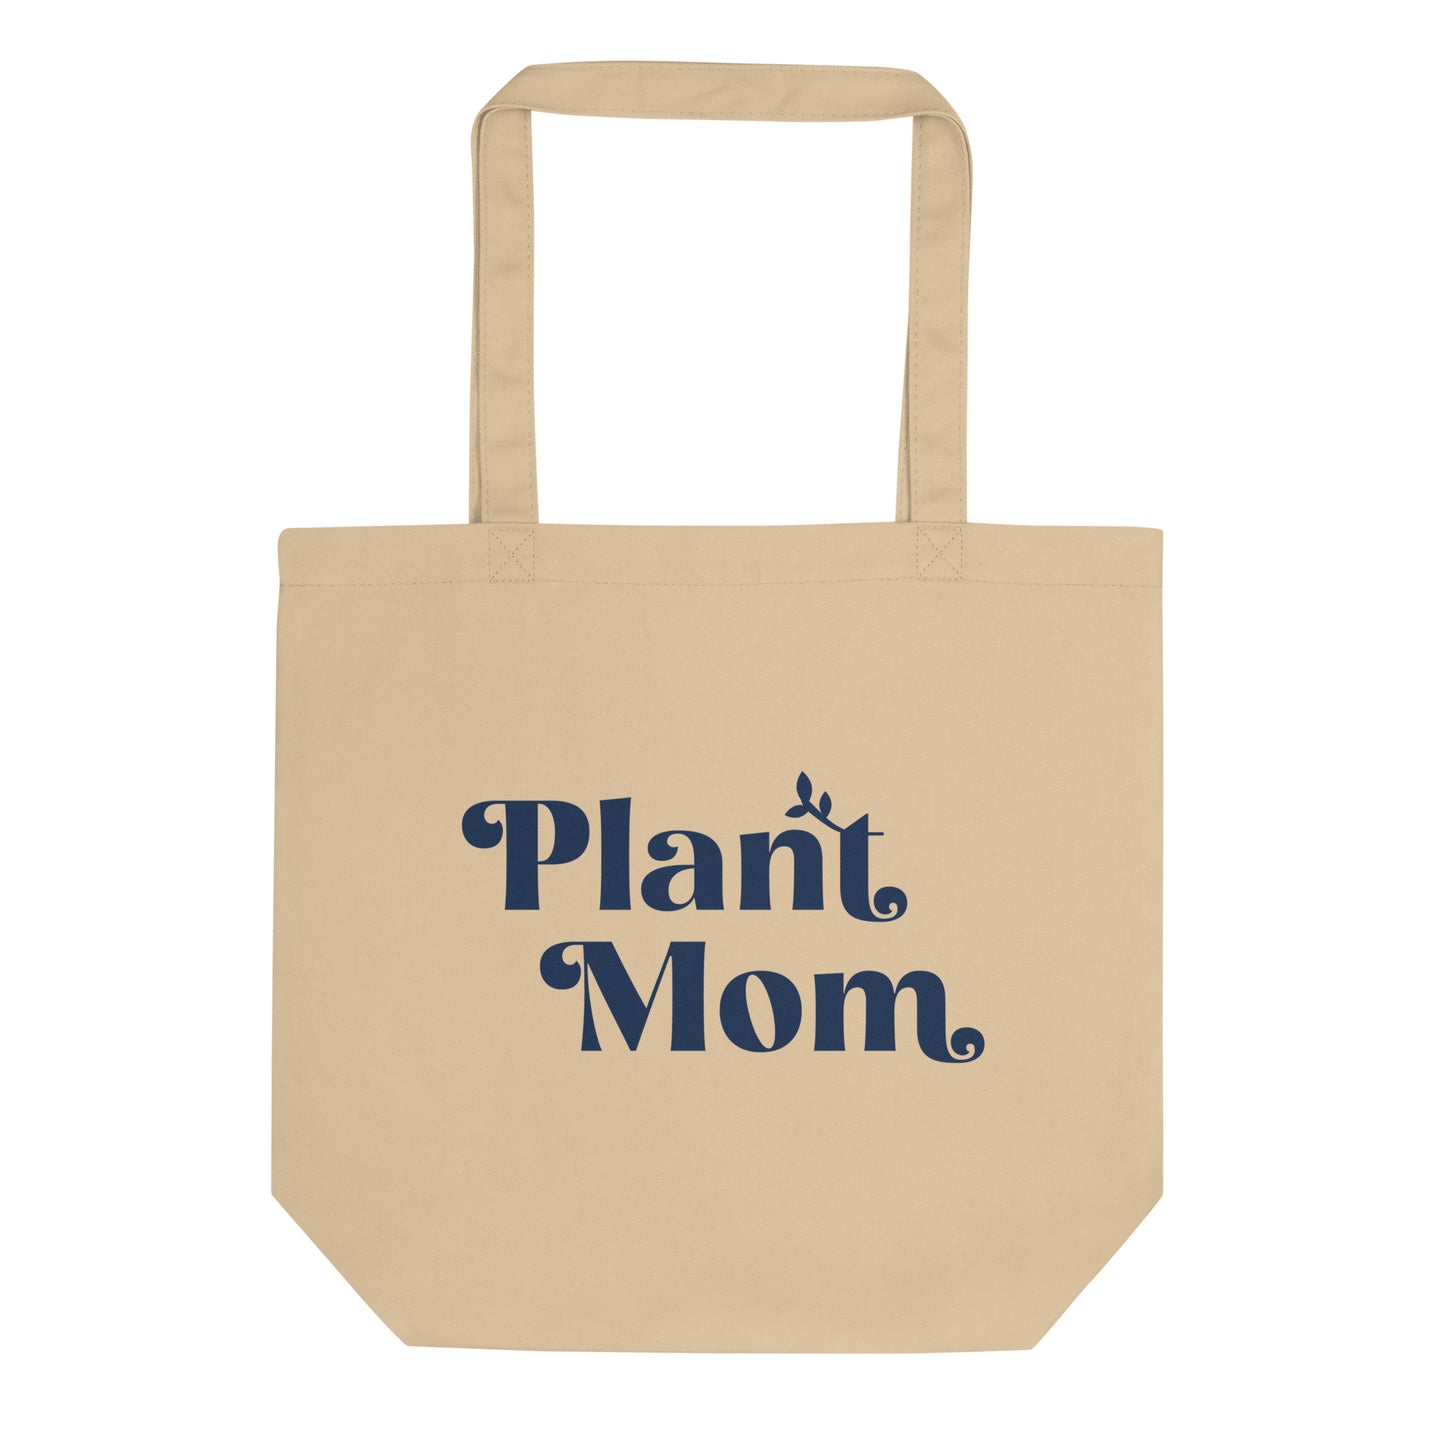 Plant Mom - Organic Cotton Tote Bag (navy on natural)